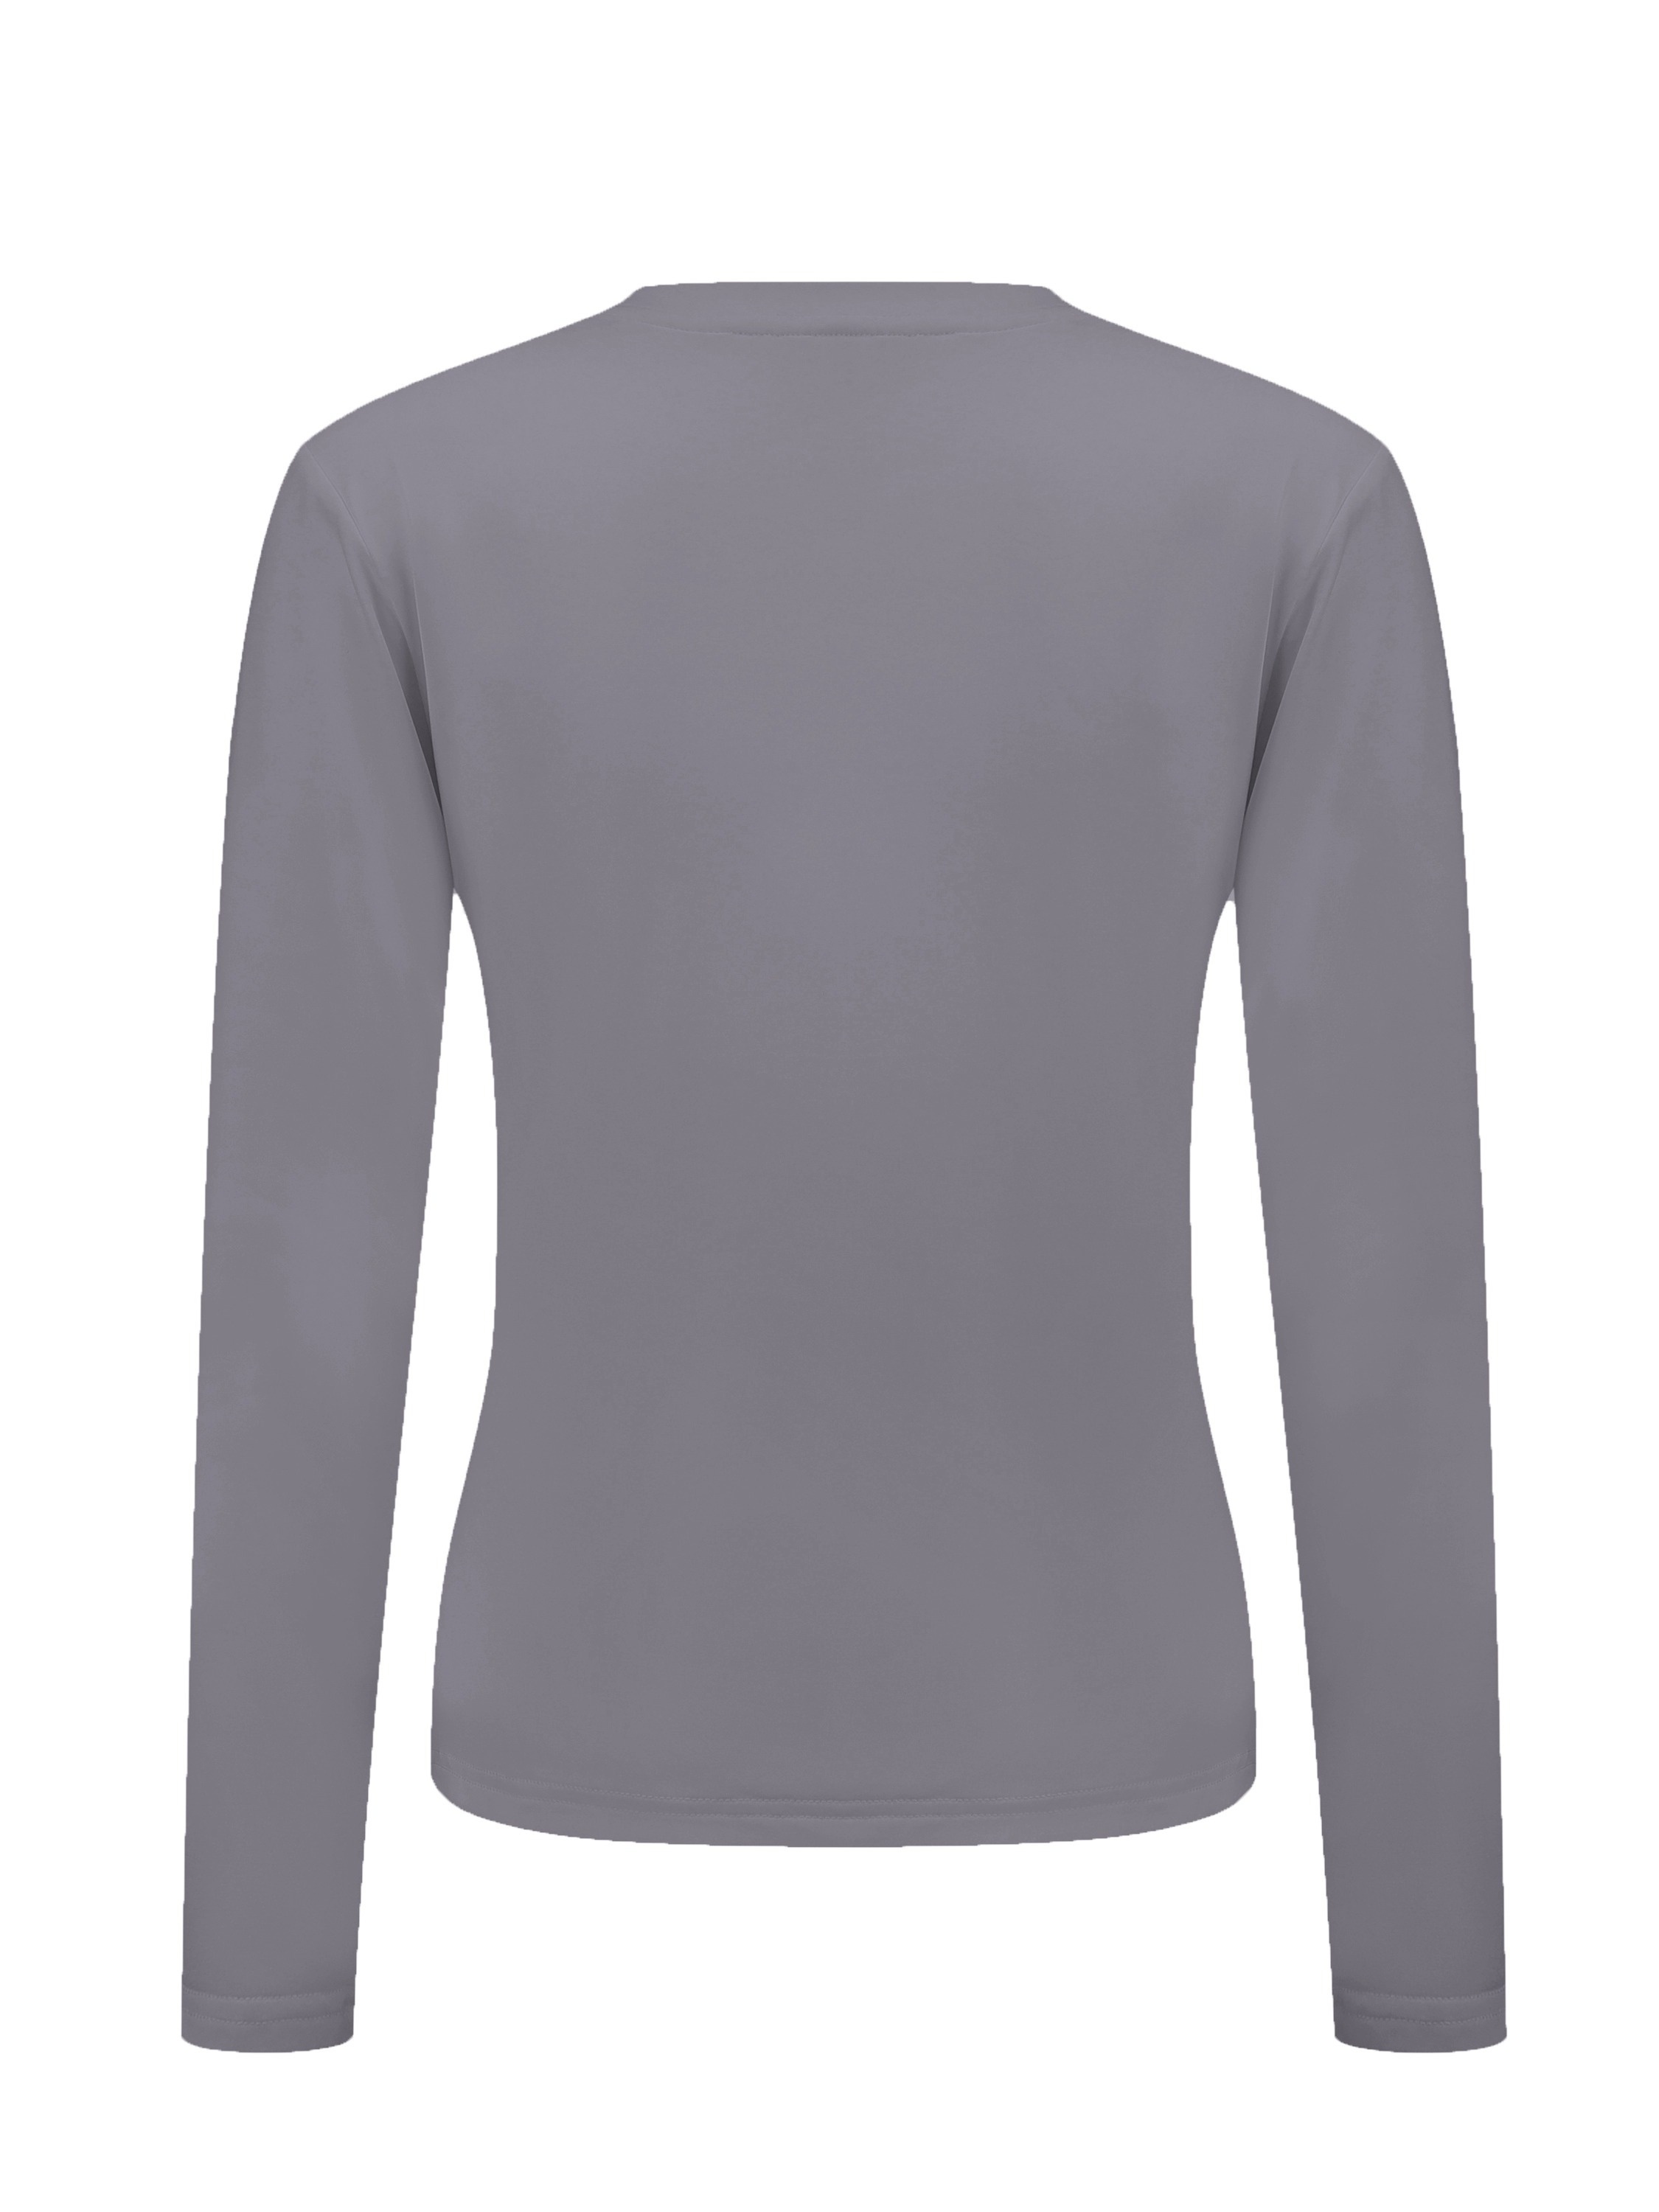 Womens Mock Turtleneck T Shirt Long Sleeve Solid Stretch Basic Thermal Top  S-XXL